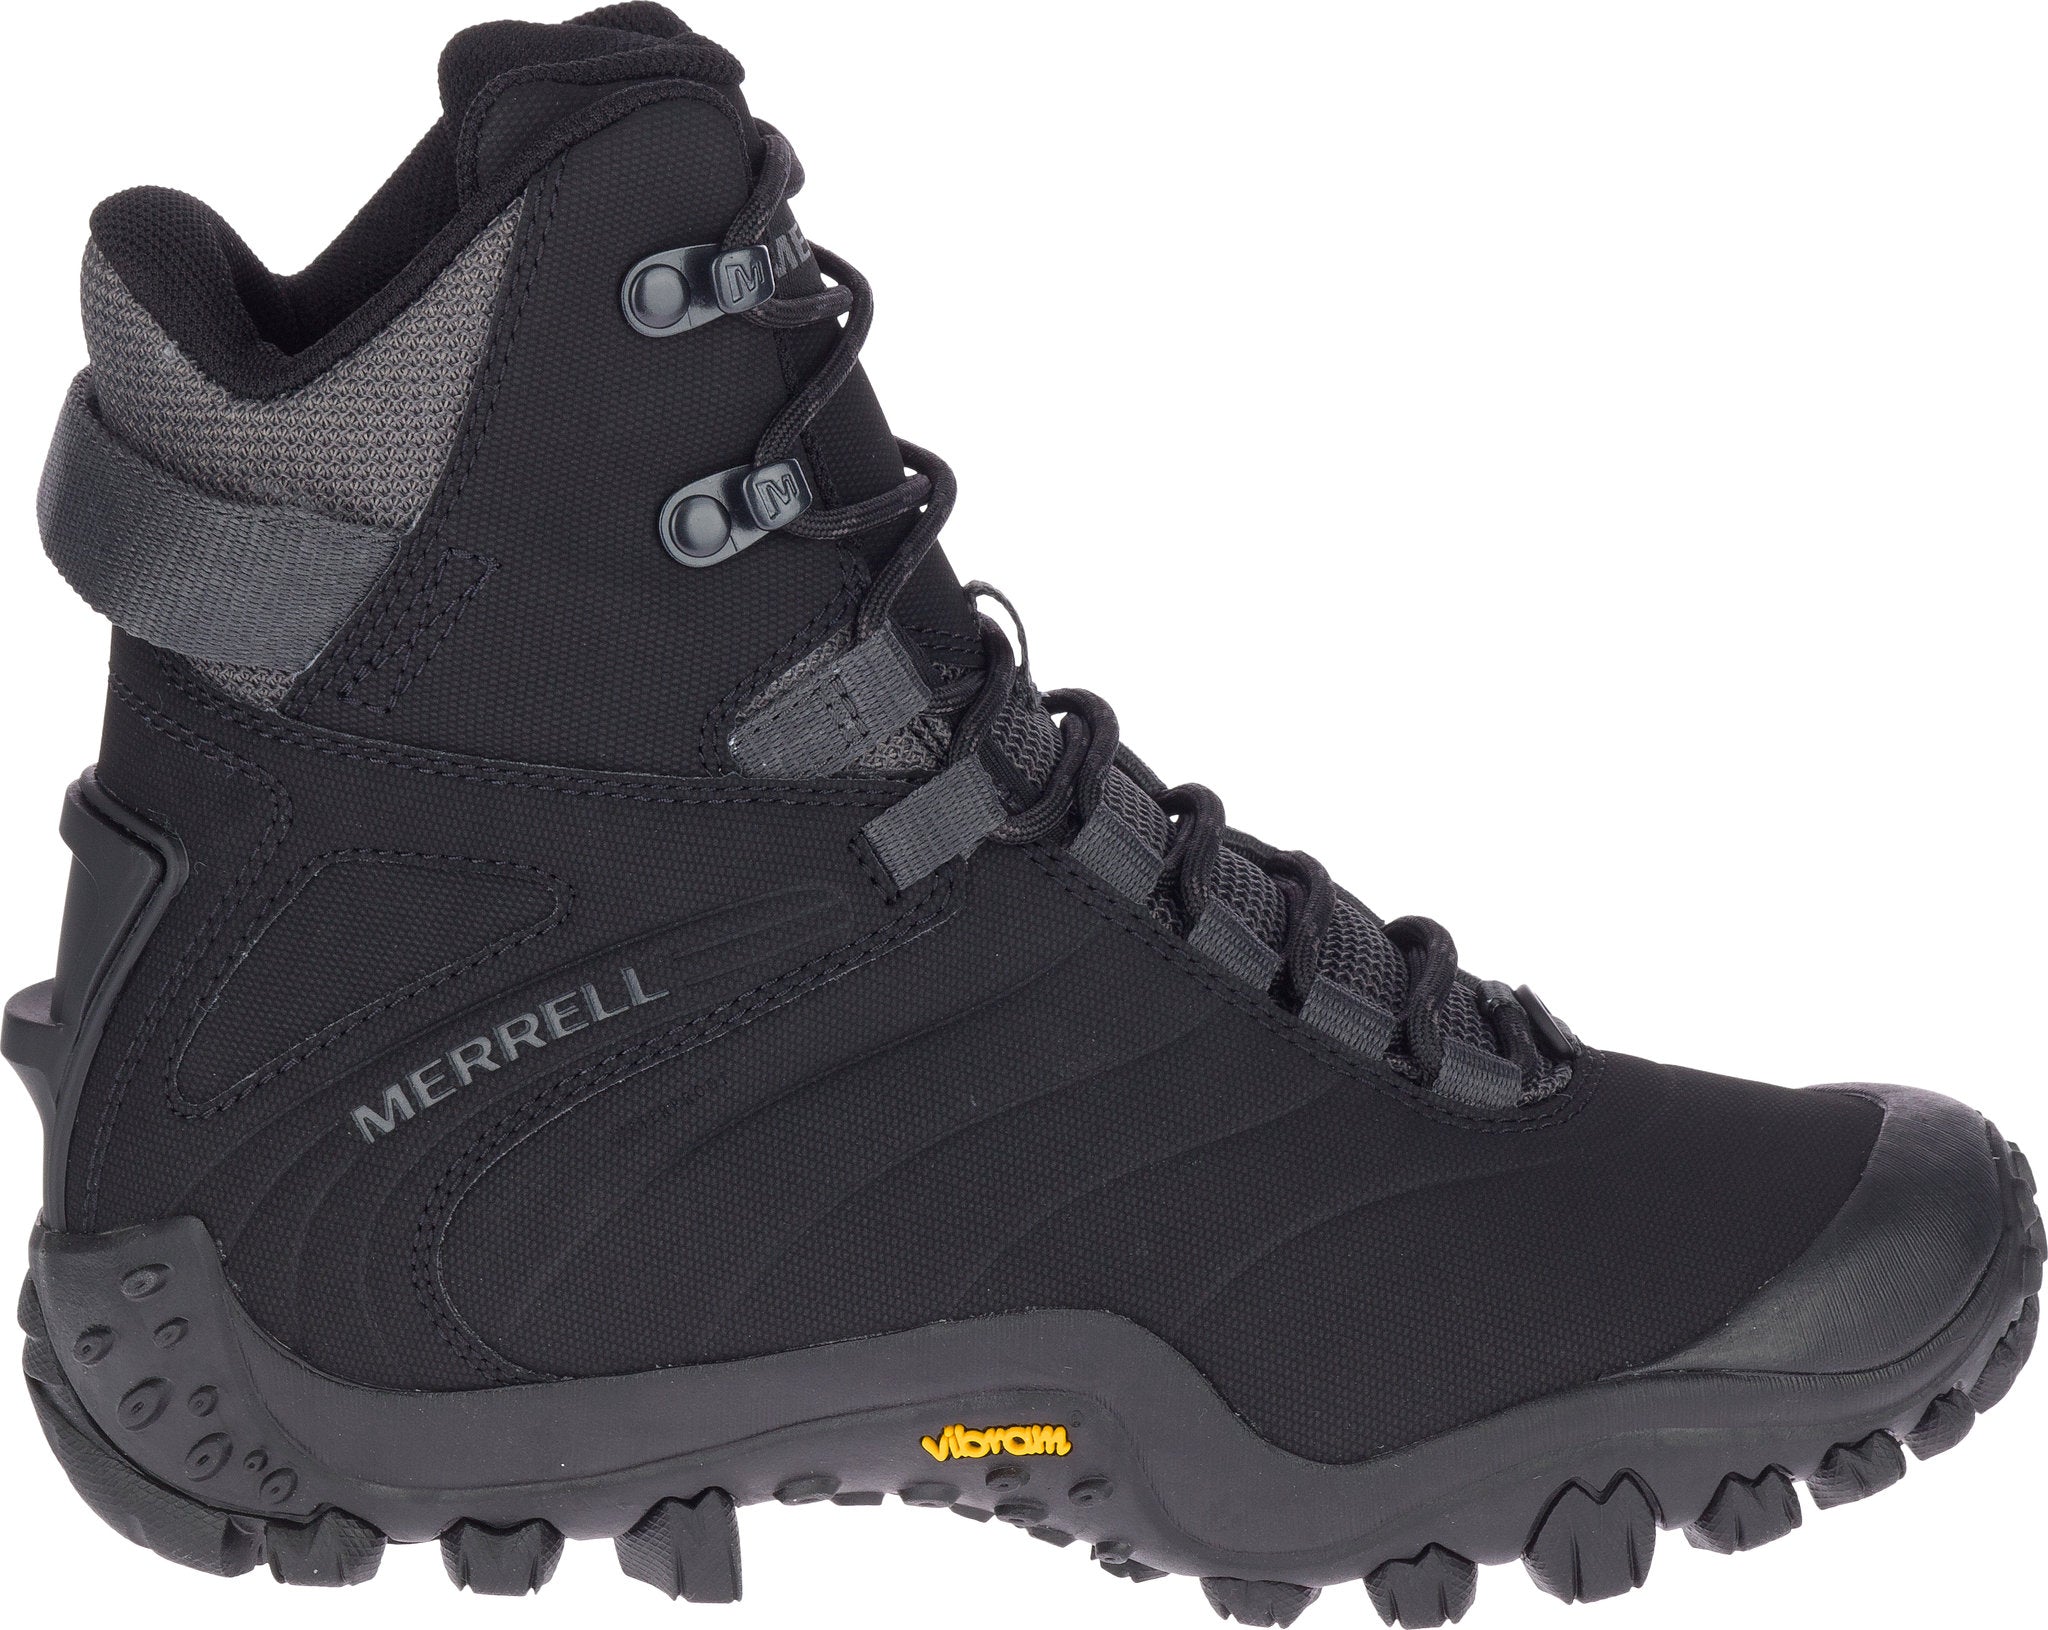 Merrell Cham 8 Thermo Tall Waterproof Boots - Women's | Altitude Sports